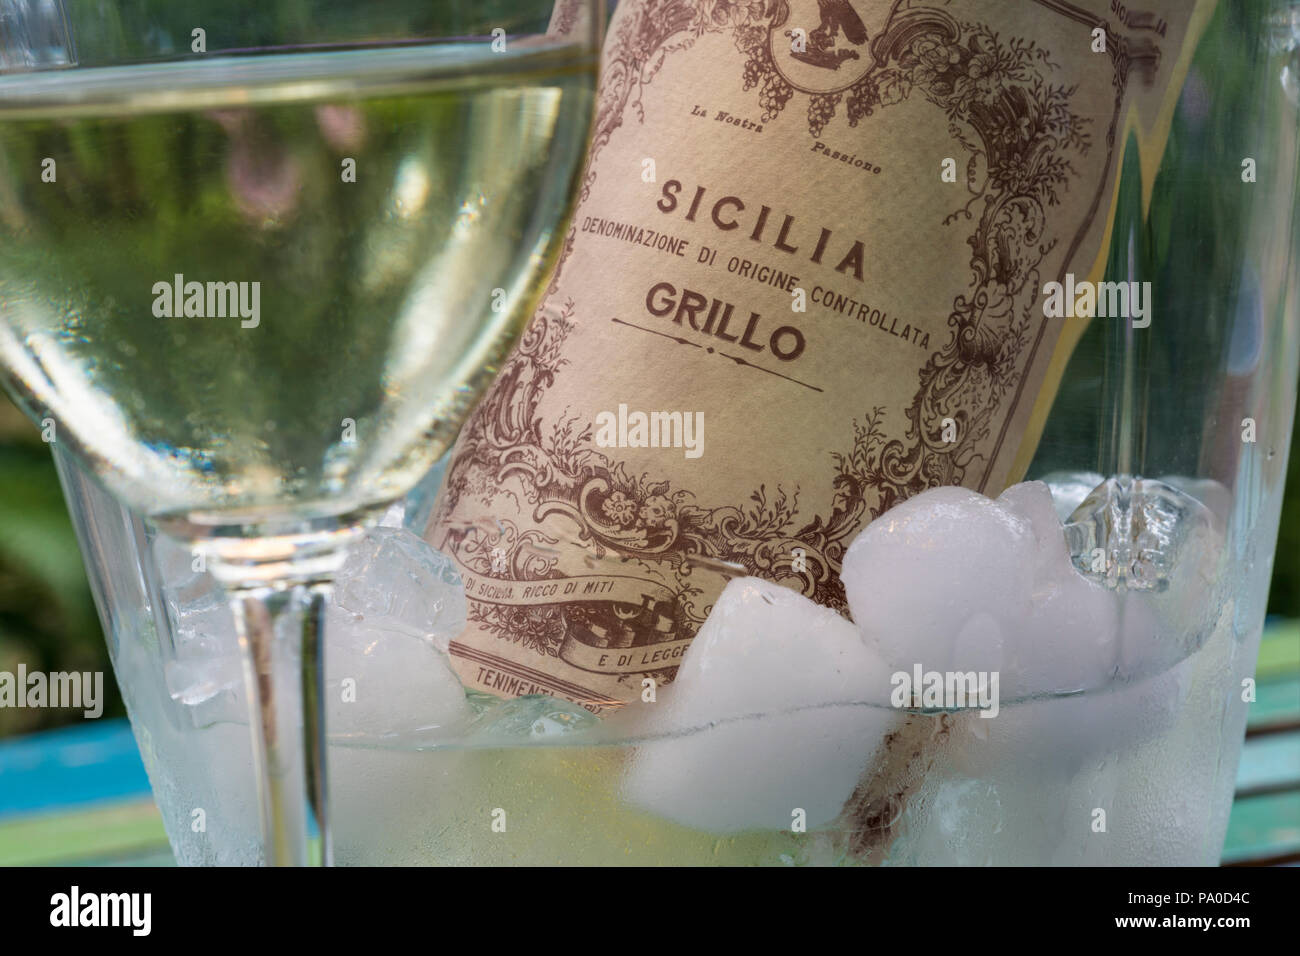 Bottle of Sicilian DOC Grillo white wine in ice bucket with poured glass in foreground alfresco garden terrace situation Italy Stock Photo